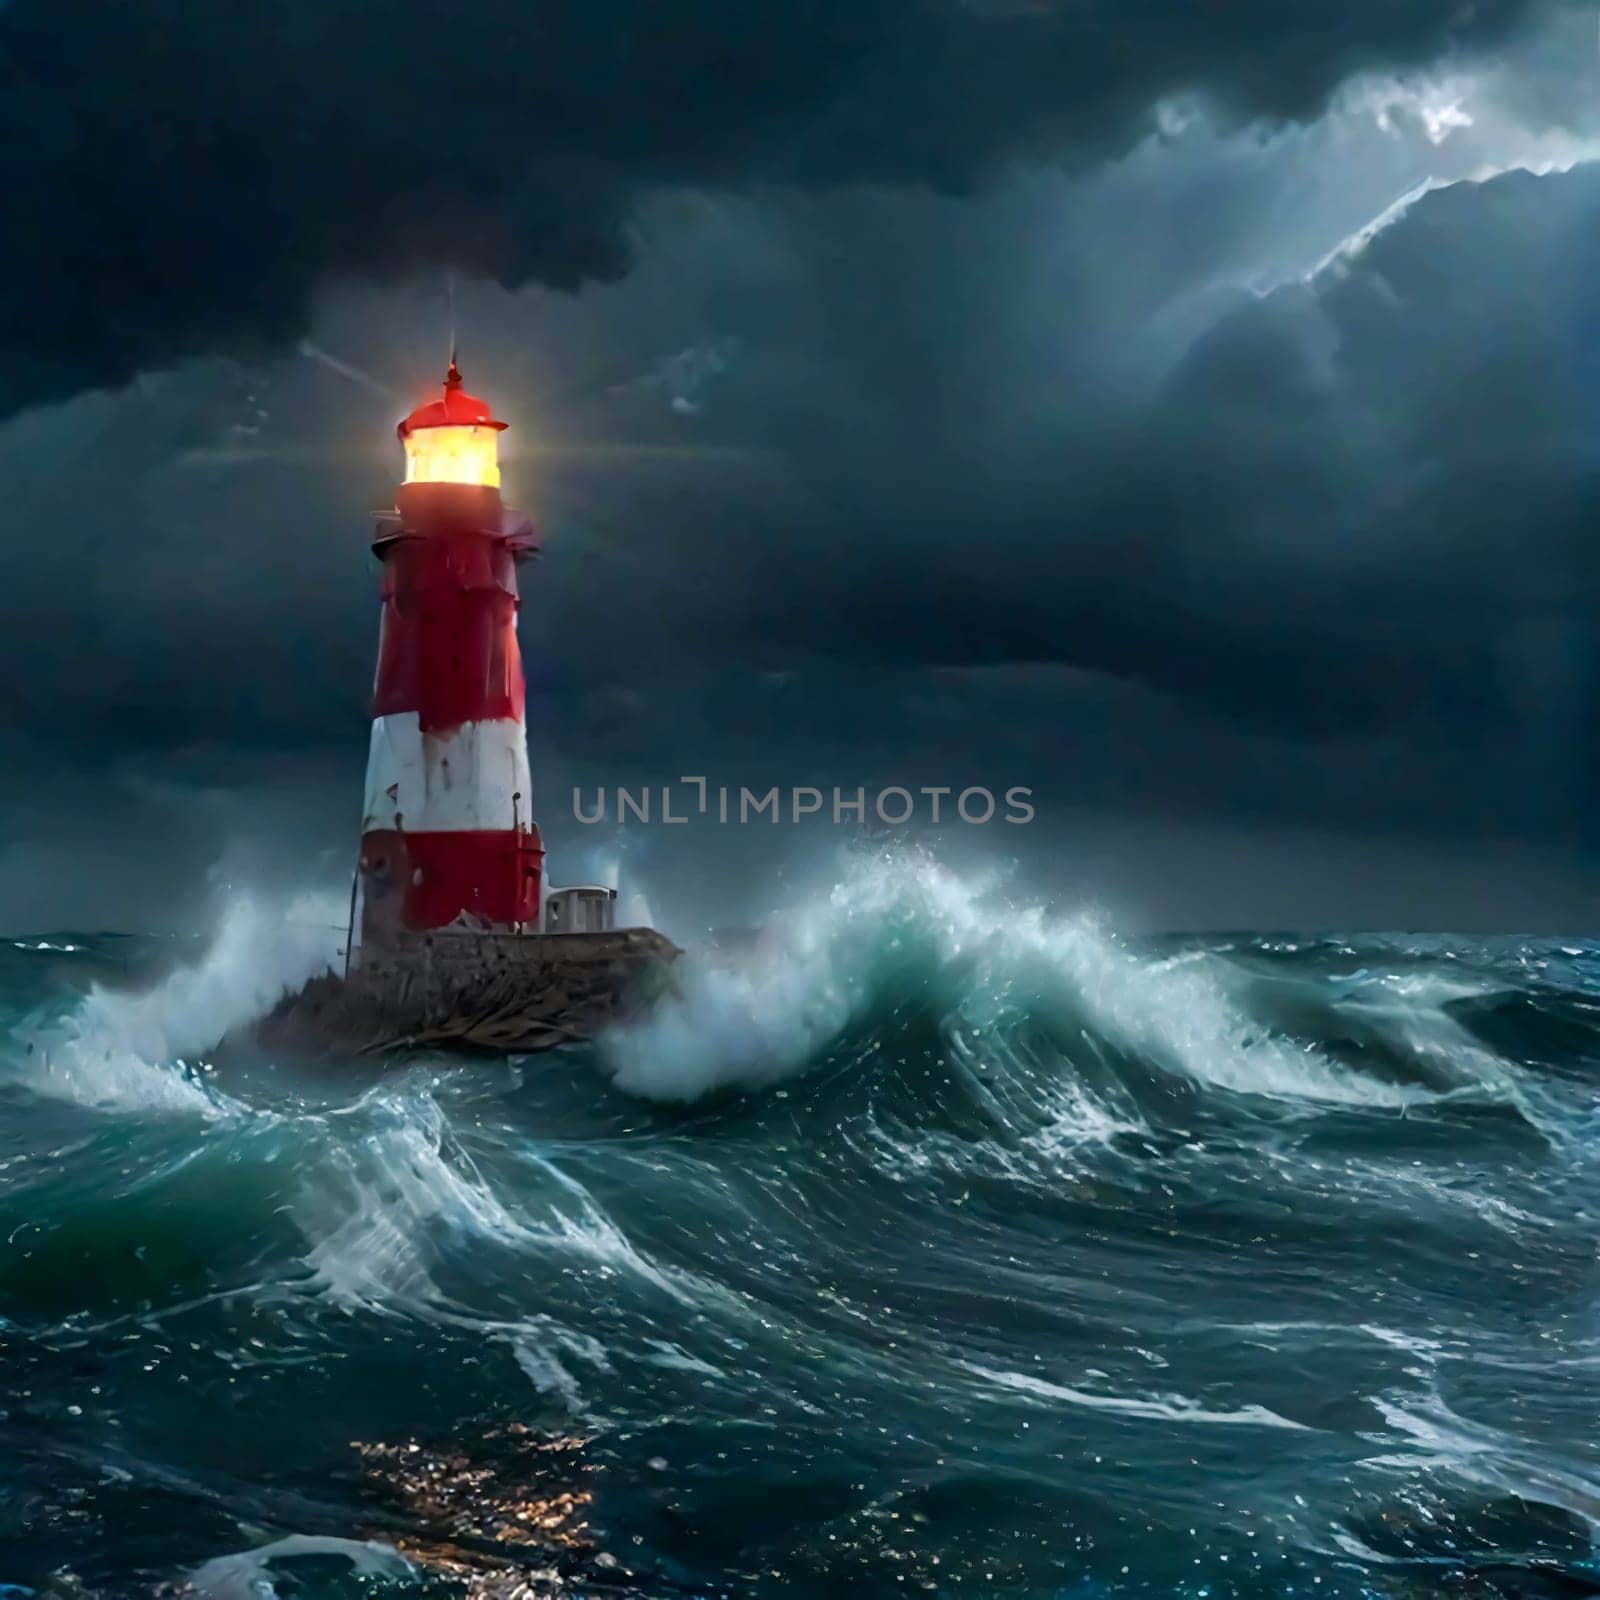 Lighthouse on the rocks by the raging waves. Lighthouse on sea rock. Sea rock lighthouse. Coastal lighthouse landscape by antoksena